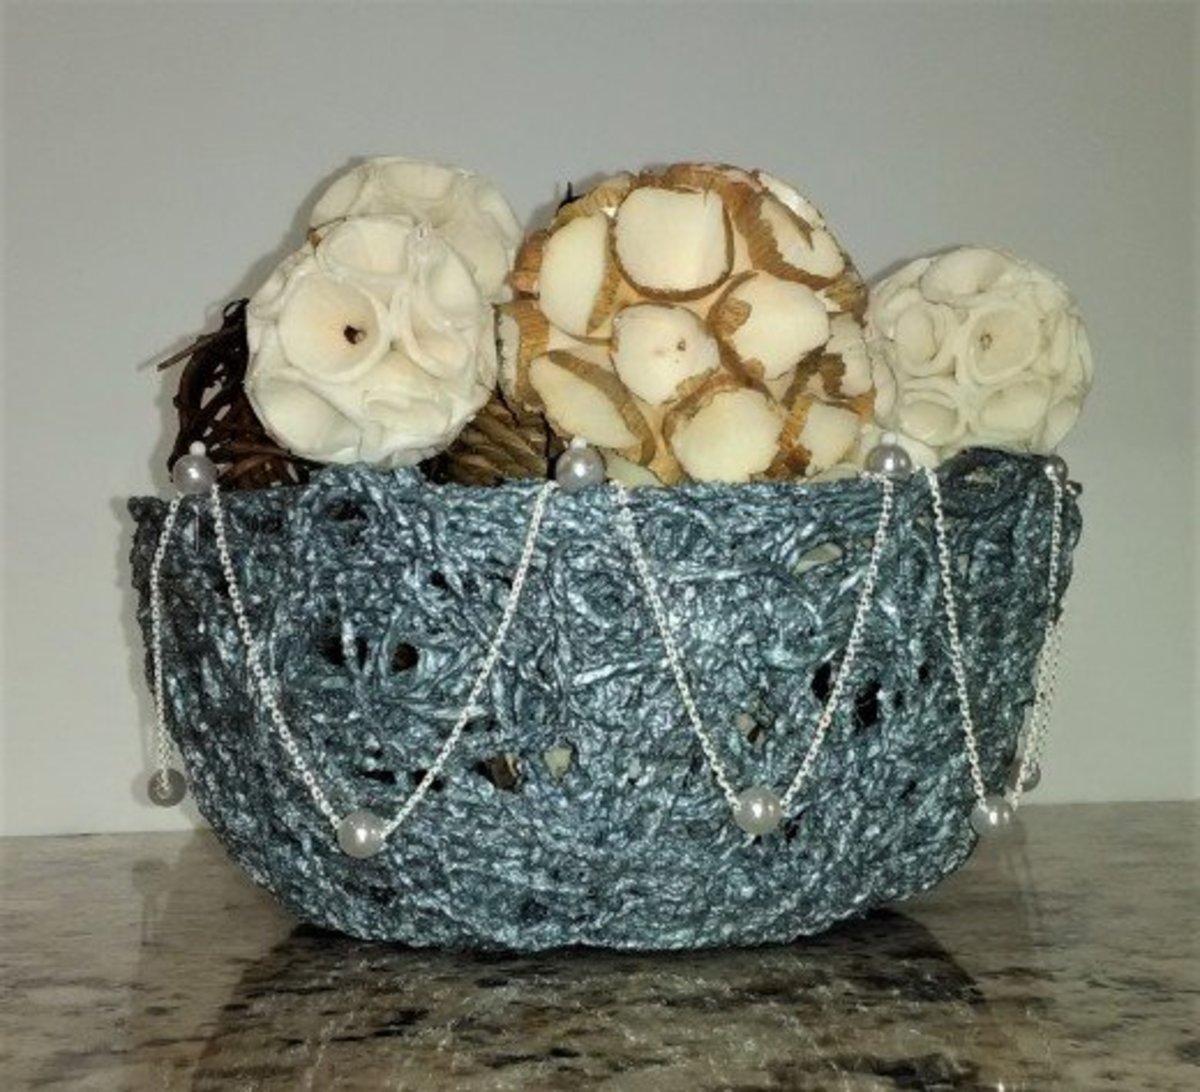 You can recycle all those bits of left over yarn into a crafty yarn bowl